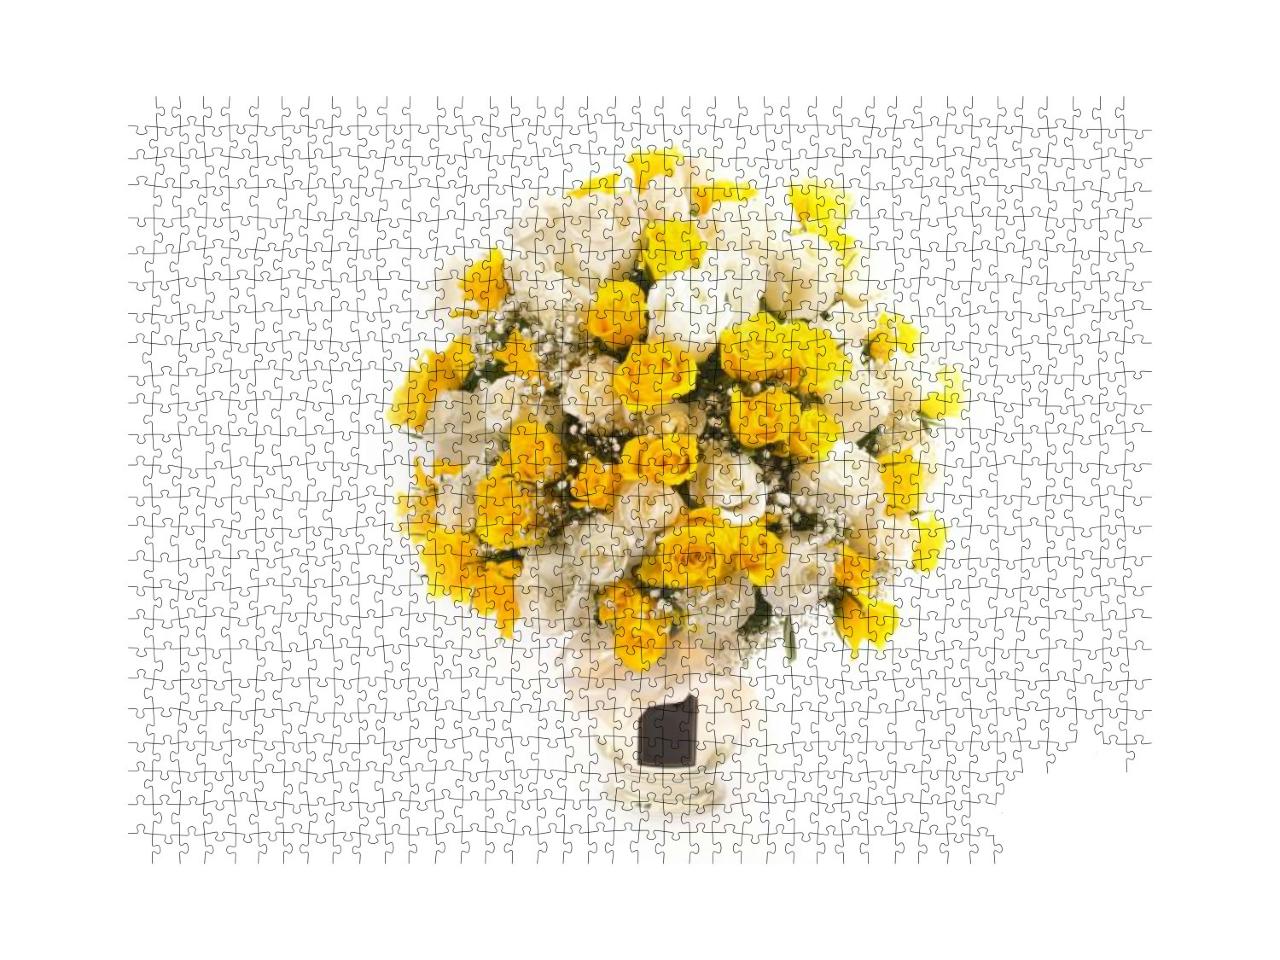 Fresh Yellow & White Rose Bouquet in a Clear Vase in Whit... Jigsaw Puzzle with 1000 pieces